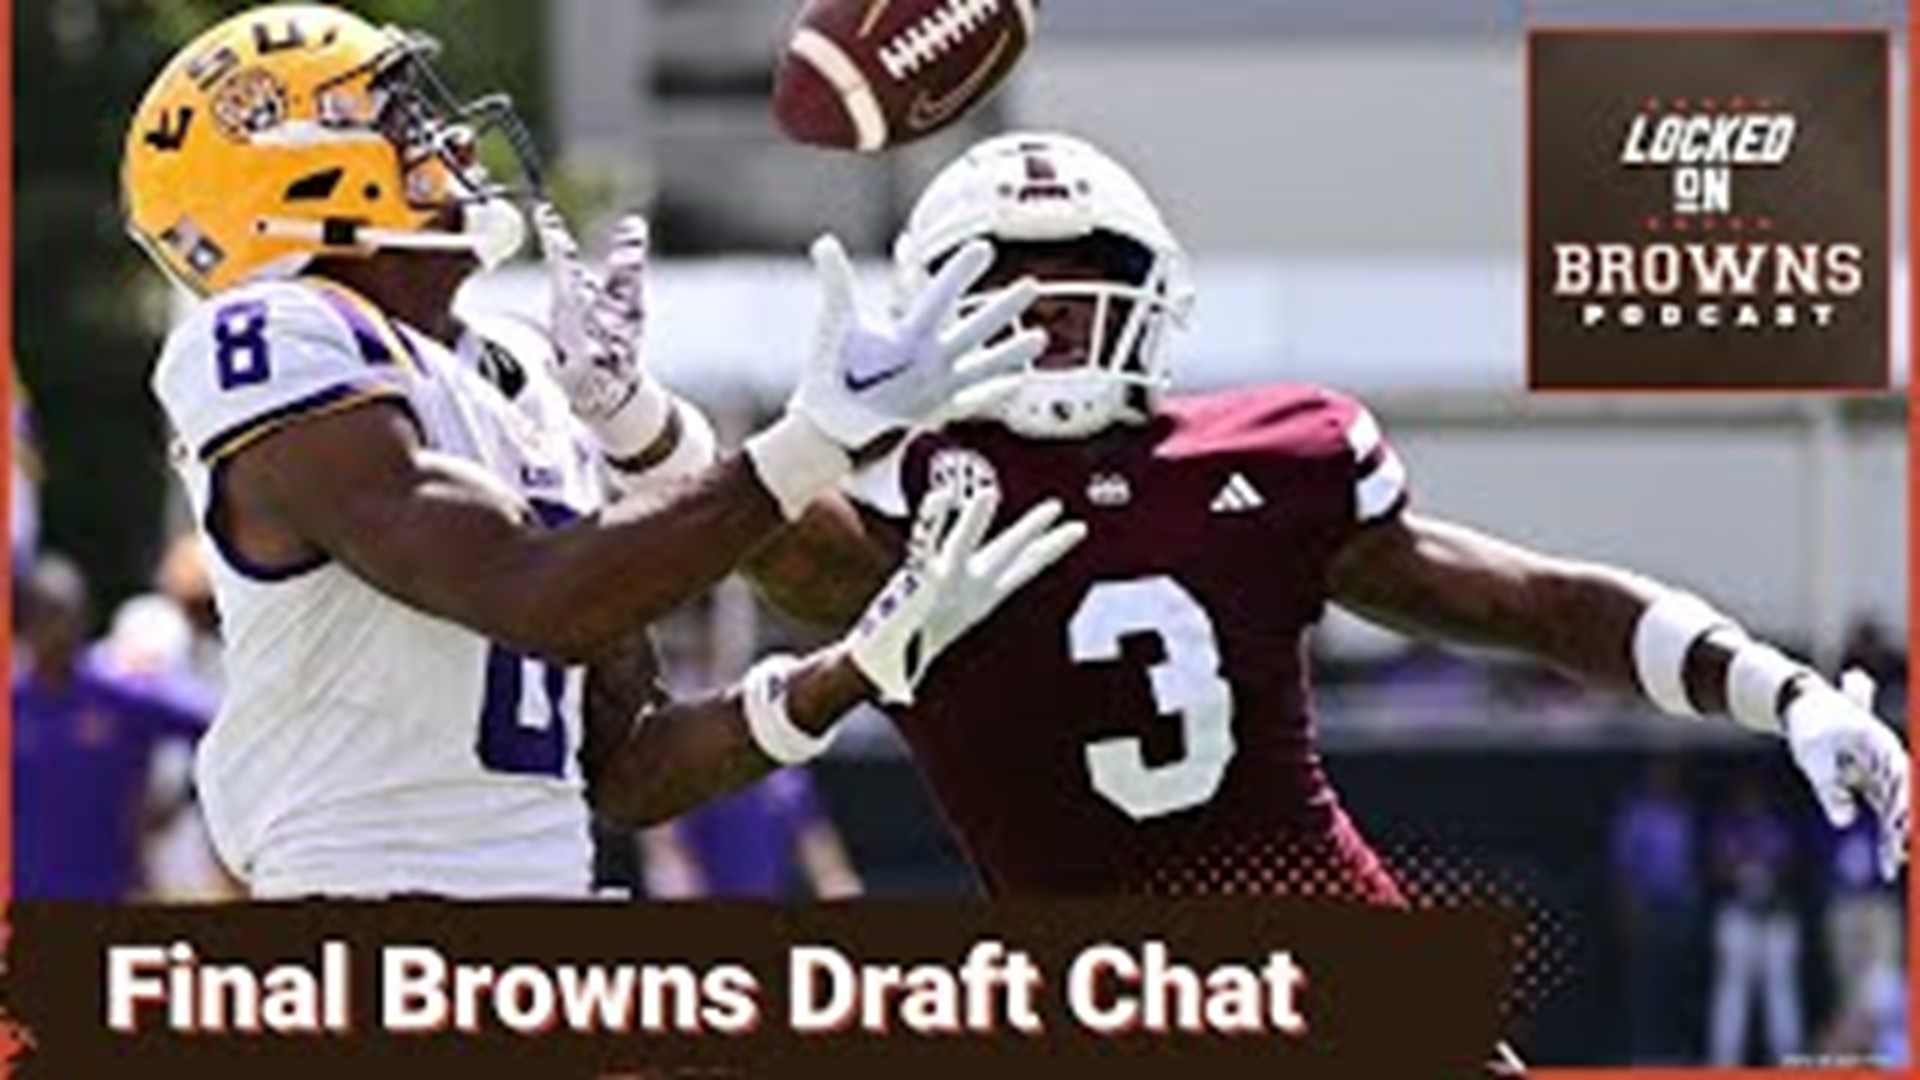 Host Jeff Lloyd gives some final thoughts on possible Cleveland Browns draft prospects. Looking at the running back position with Chubb's health concerns.